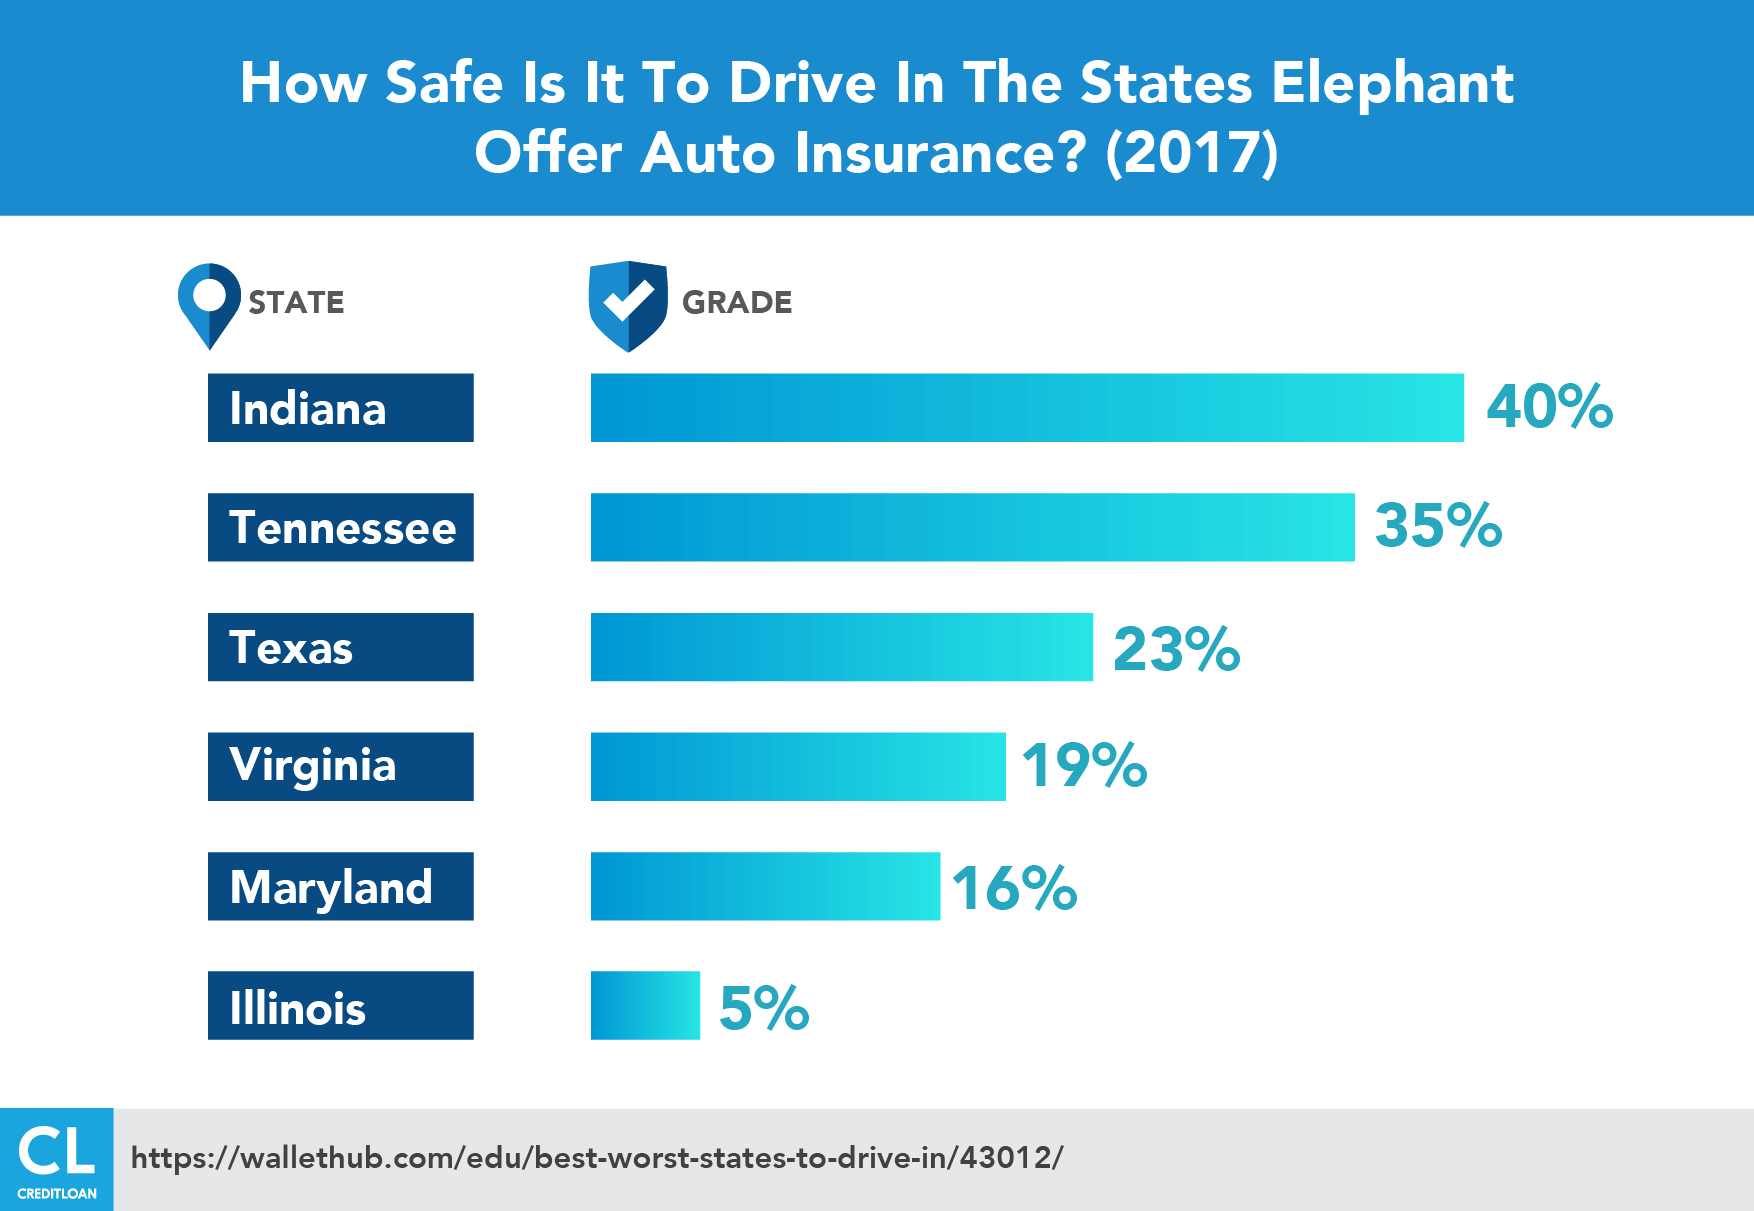 How Safe is it to Drive in the States Elephant offer Auto Insurance?